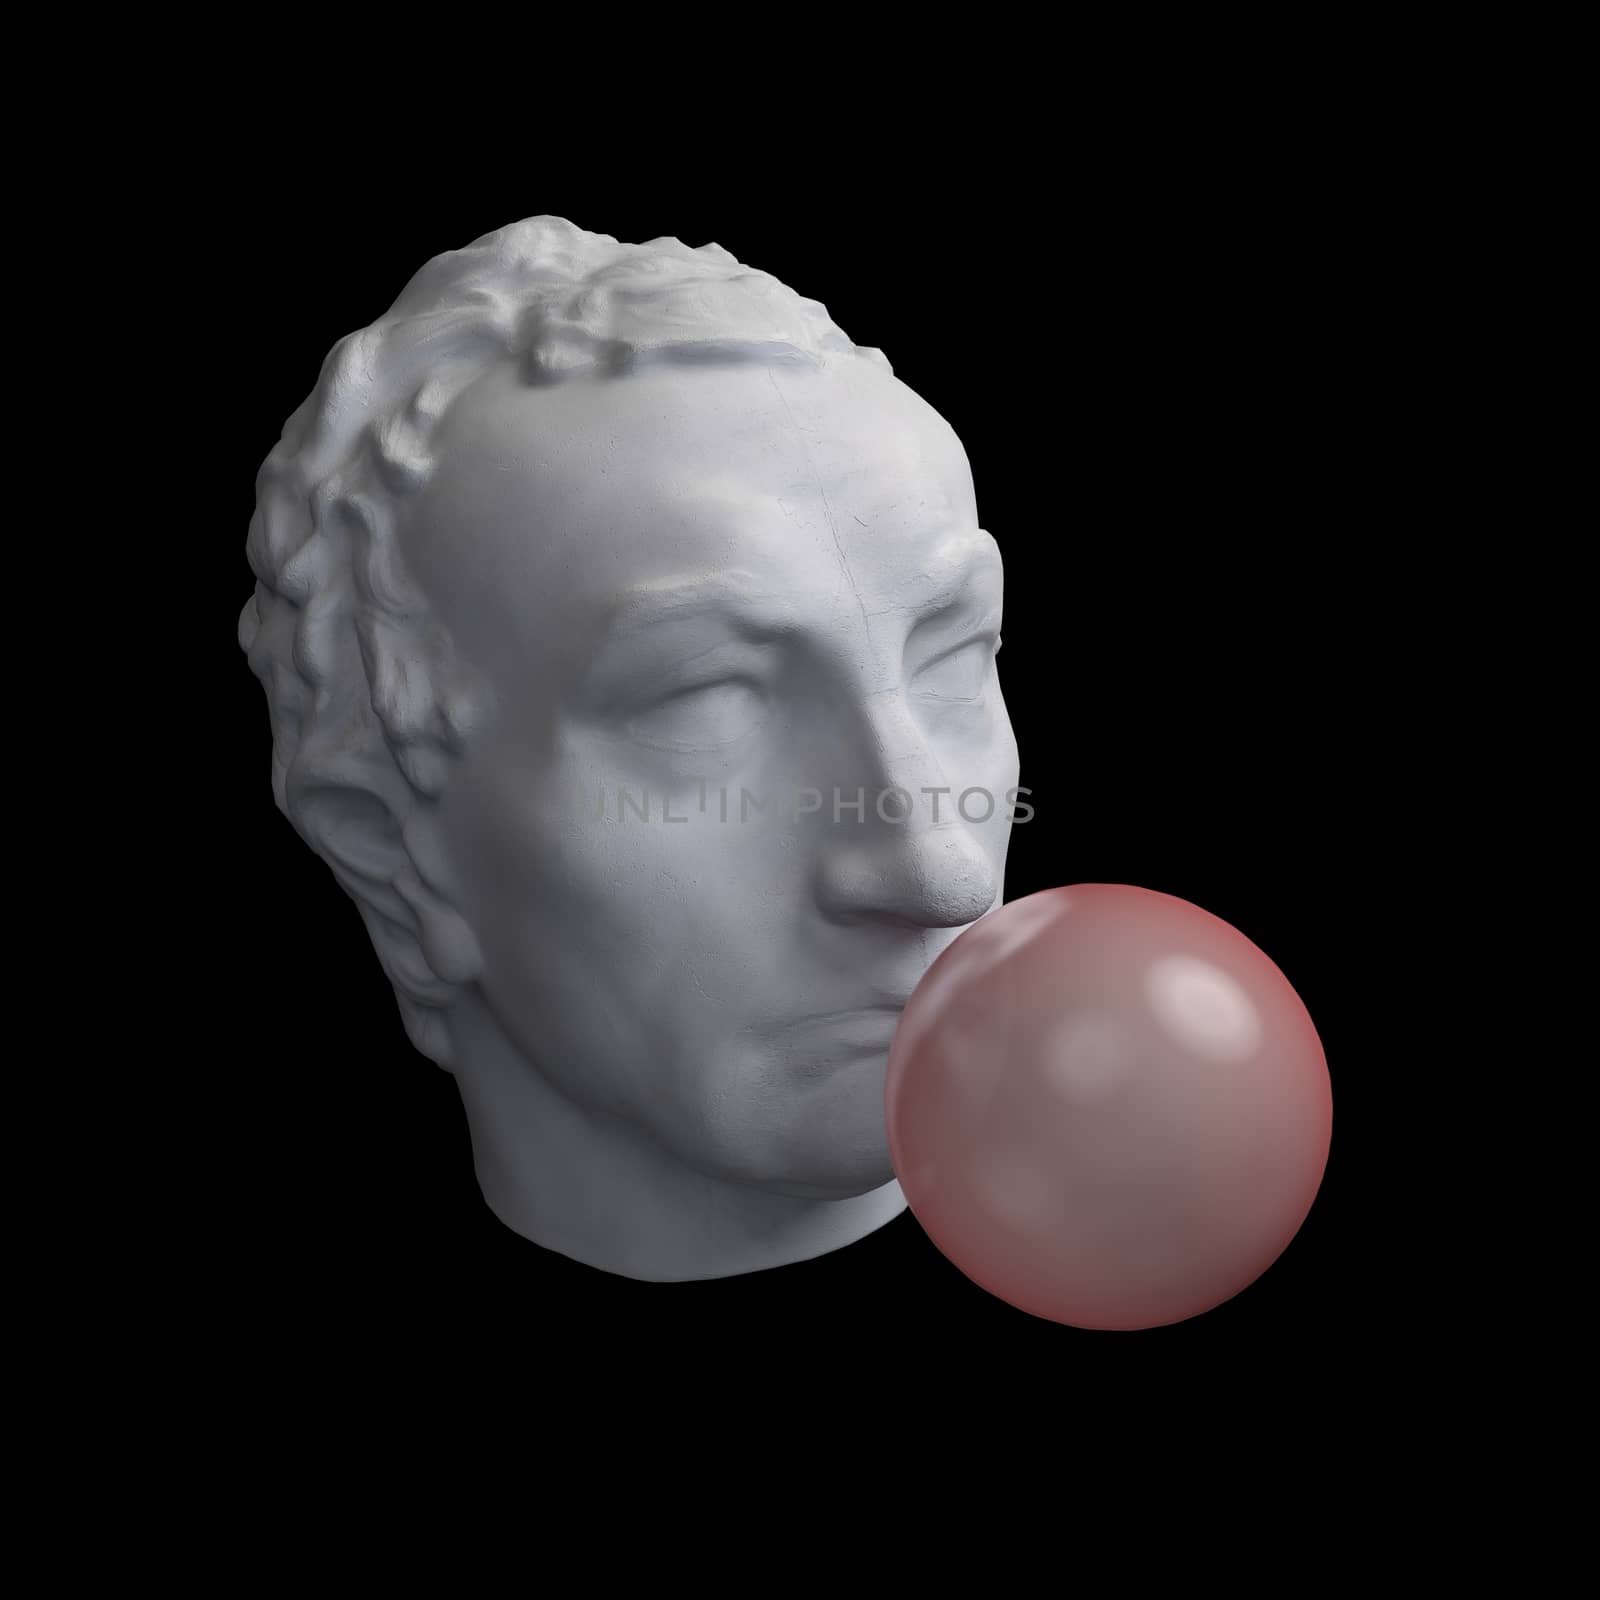 Funny illustration from 3d rendering of classical head sculpture blowing a pink chewing gum bubble. Isolated on black background